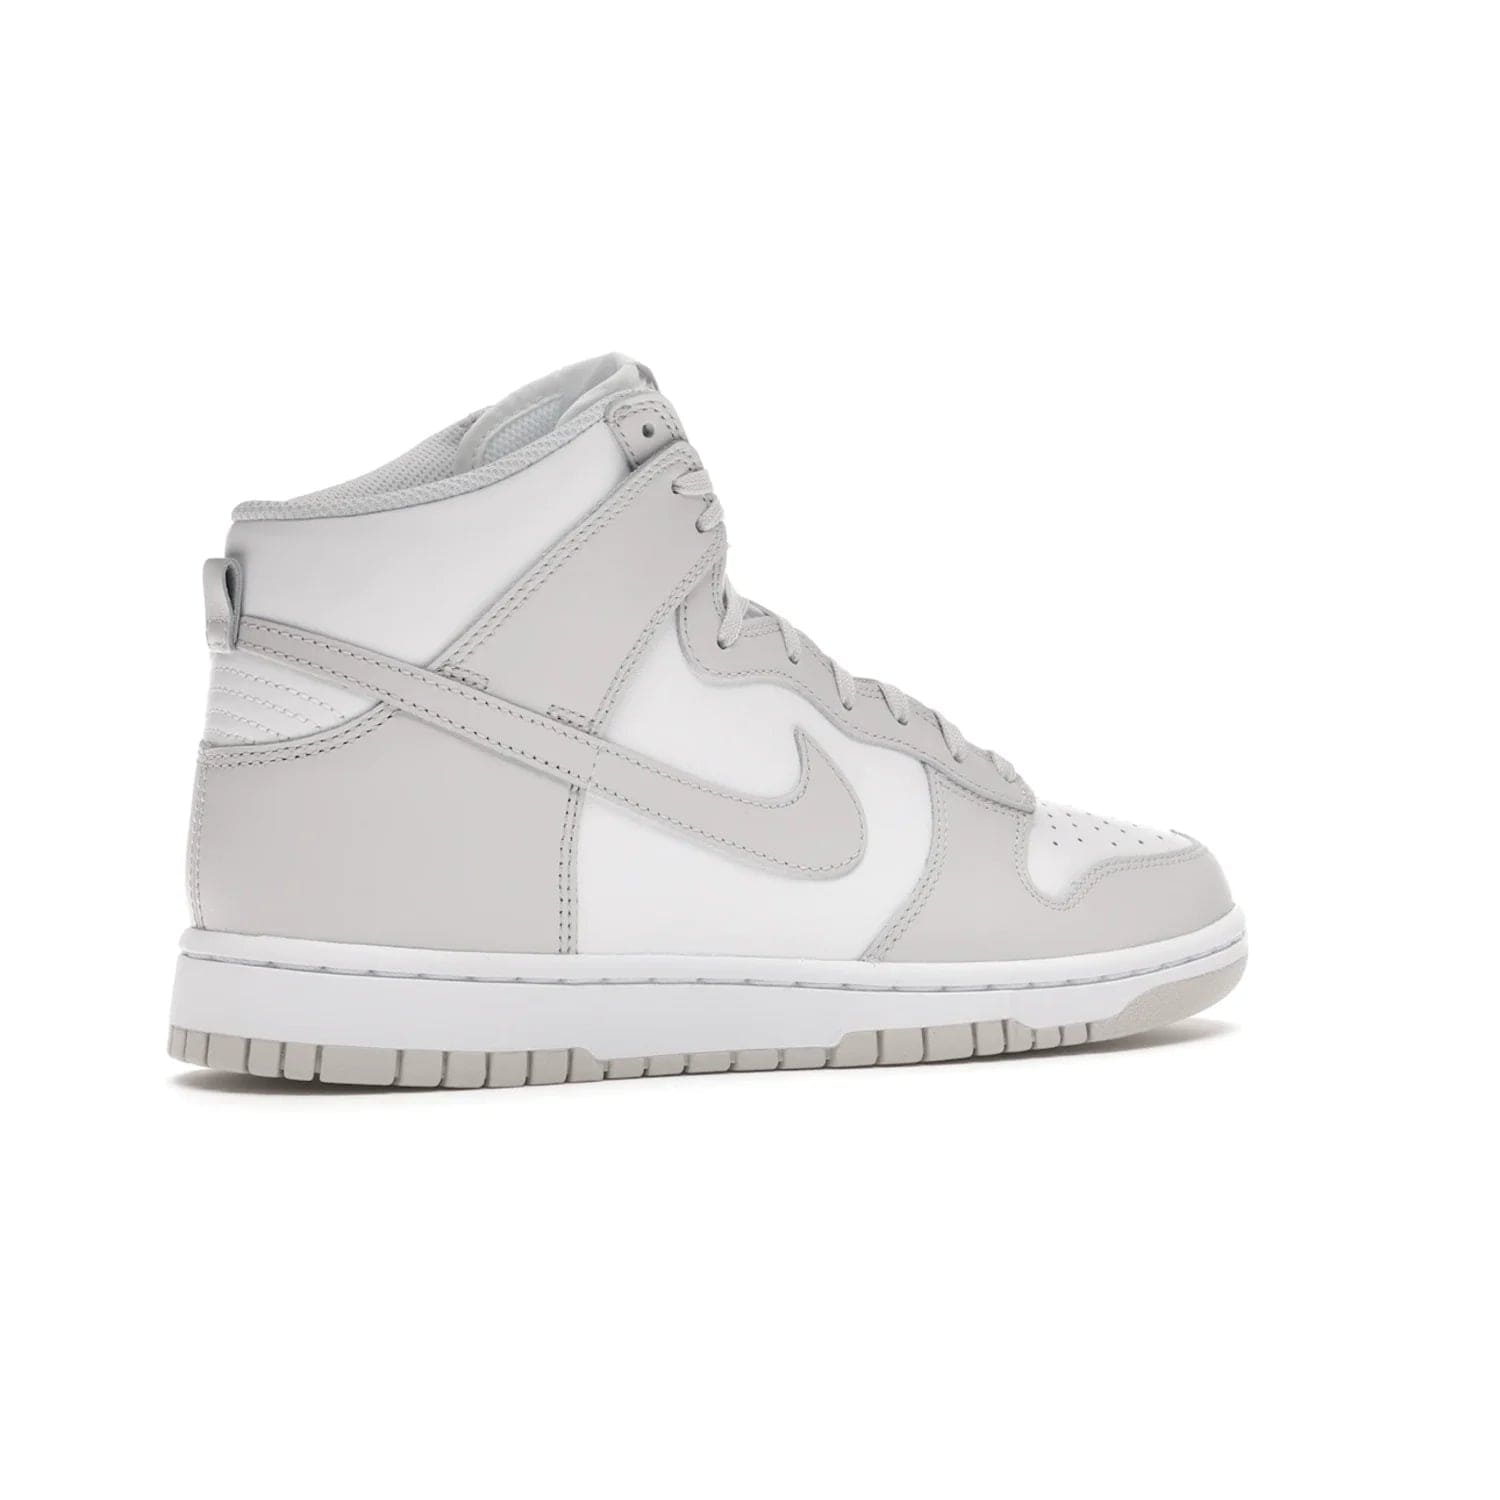 Nike Dunk High Retro White Vast Grey (2021) - Image 34 - Only at www.BallersClubKickz.com - Nike Dunk High Retro White Vast Grey 2021: classic '80s basketball sneaker with a crisp white base, grey overlays, midsole tooling and outsole. Dropped Feb. 2021.